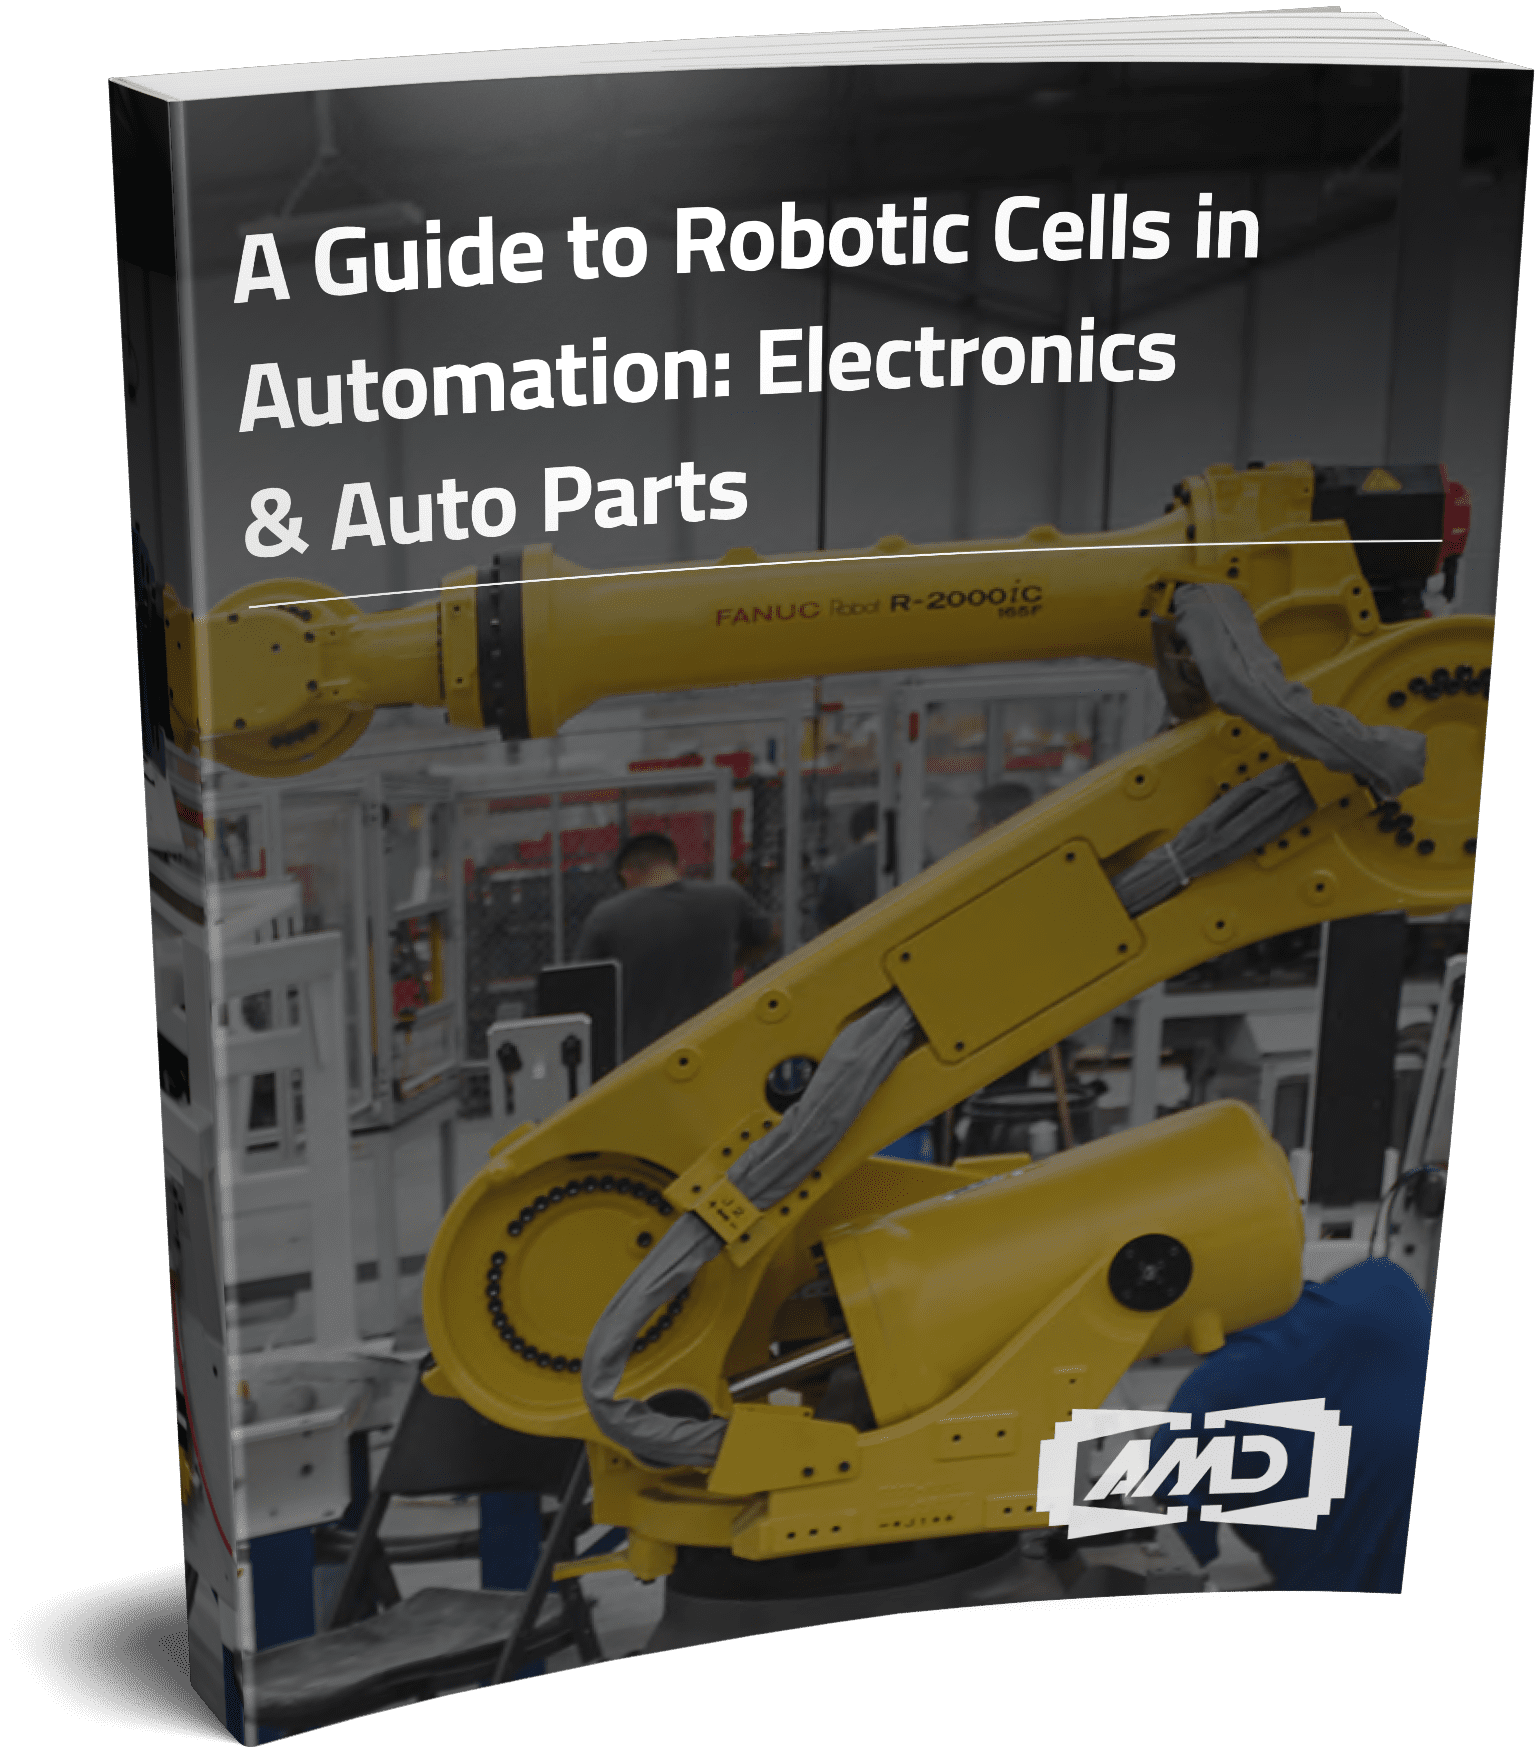 A Guide to Robotic Cells in Automation: Electronics & Auto Parts 